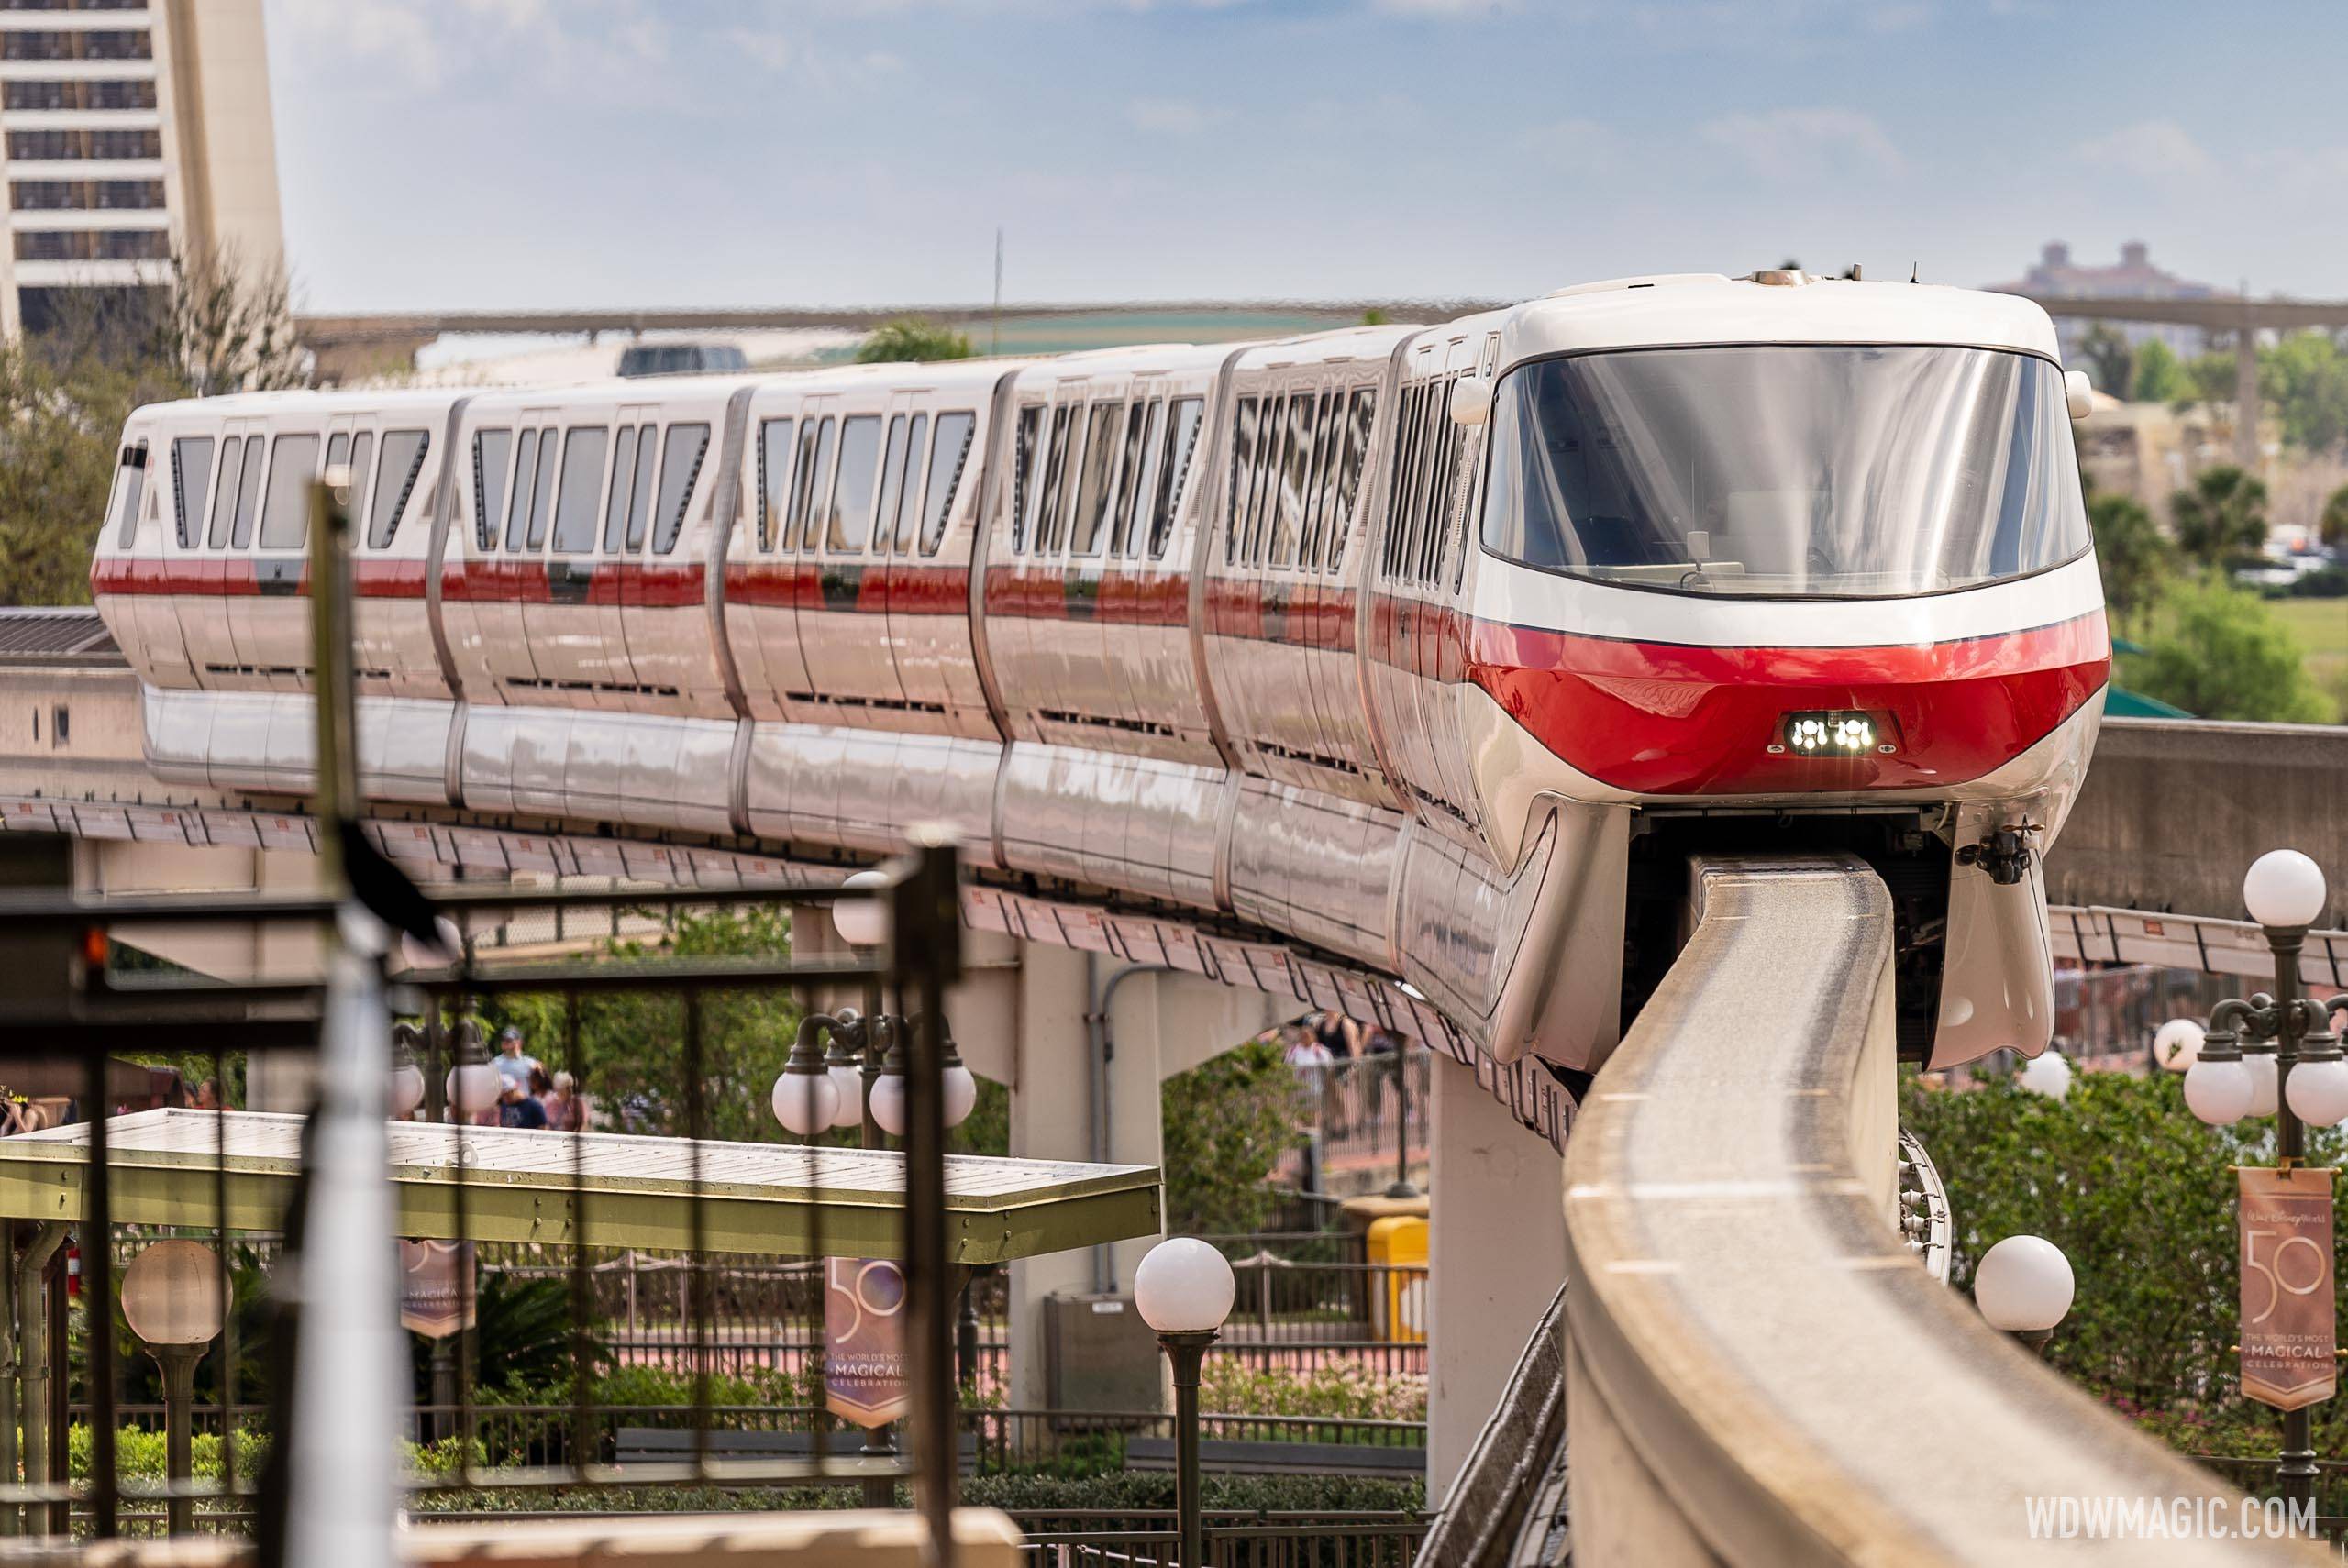 Resort Monorail now operating later on ticketed event nights